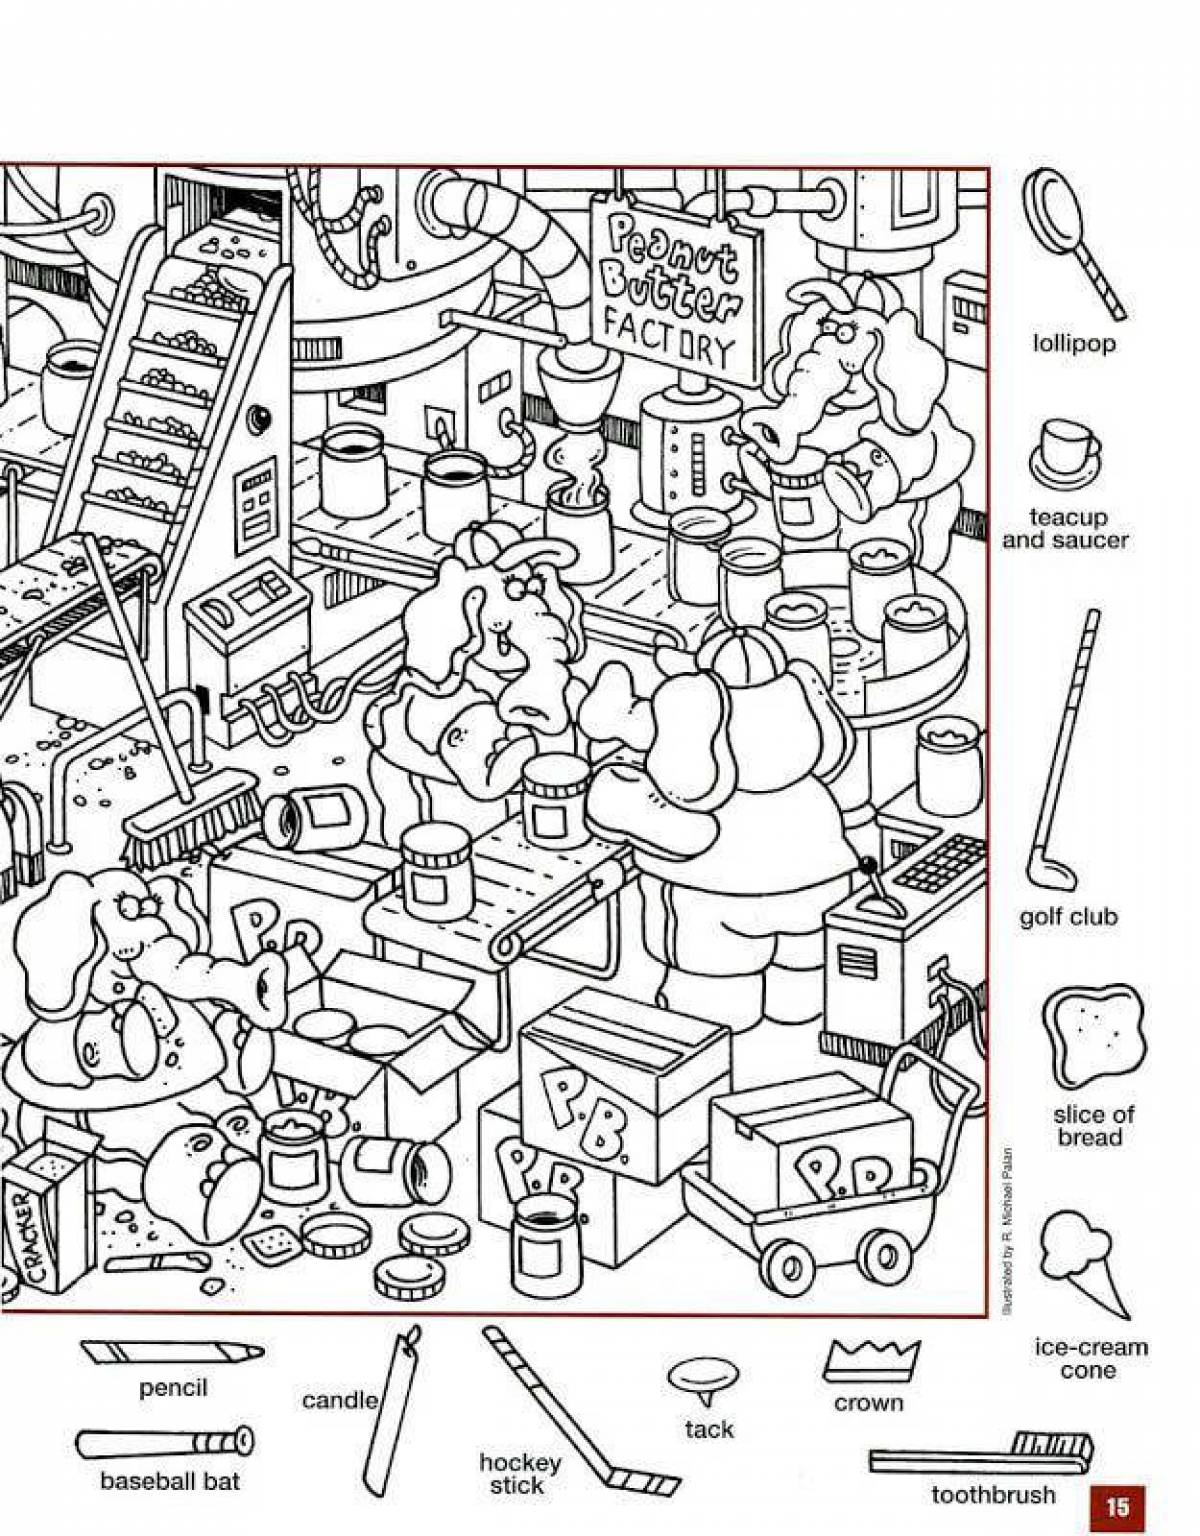 Brilliant where is the coloring page